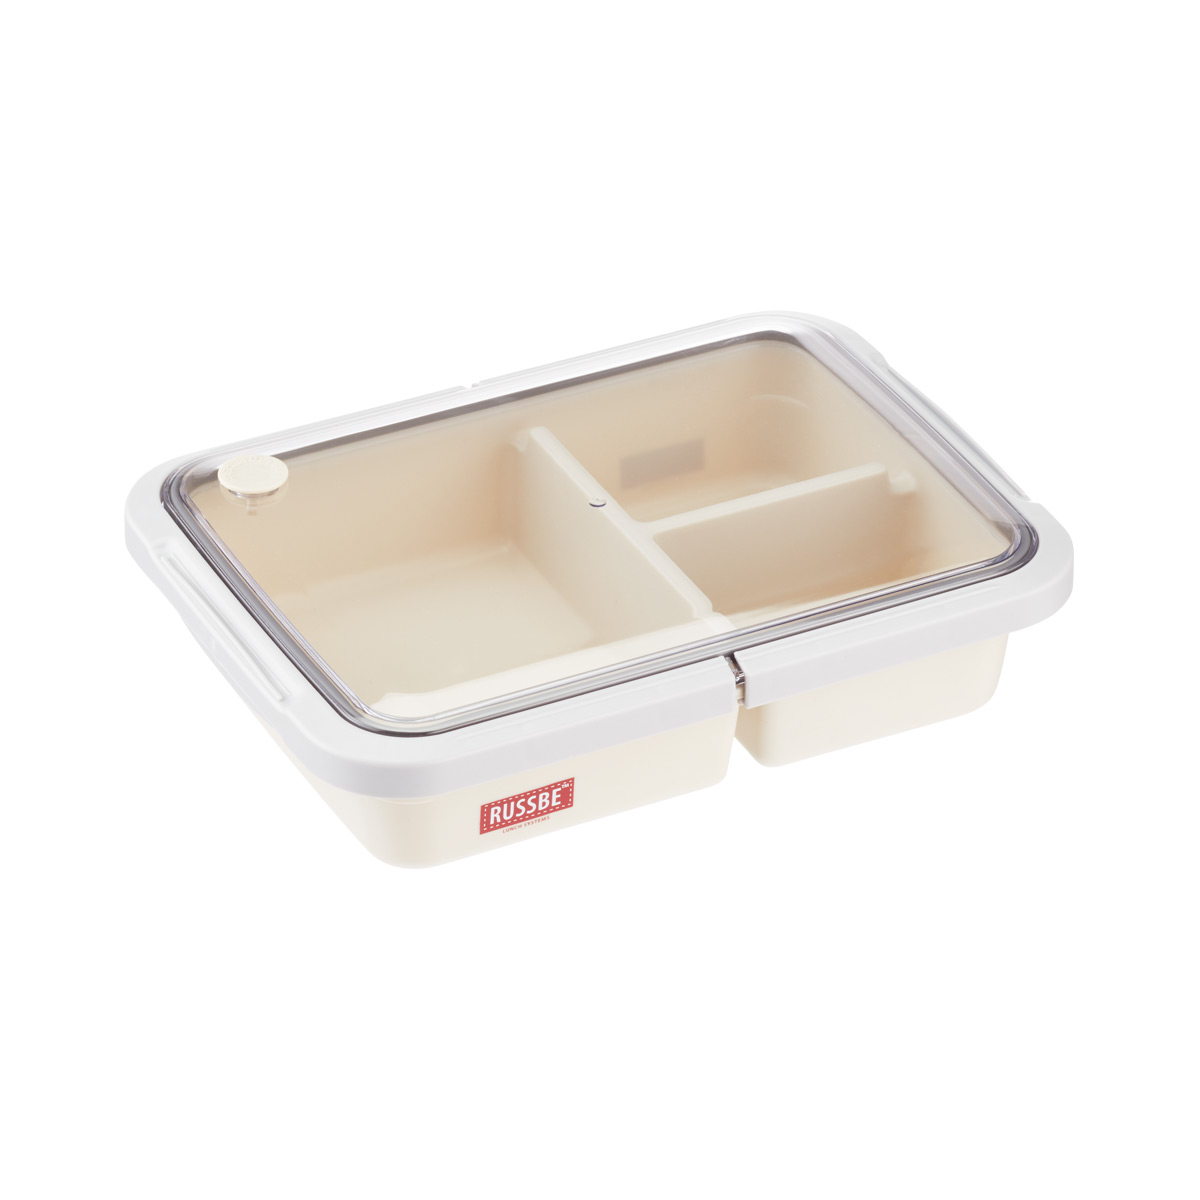 https://www.containerstore.com/catalogimages/329973/10073259-bento-box-3-section-1.6qt-b.jpg